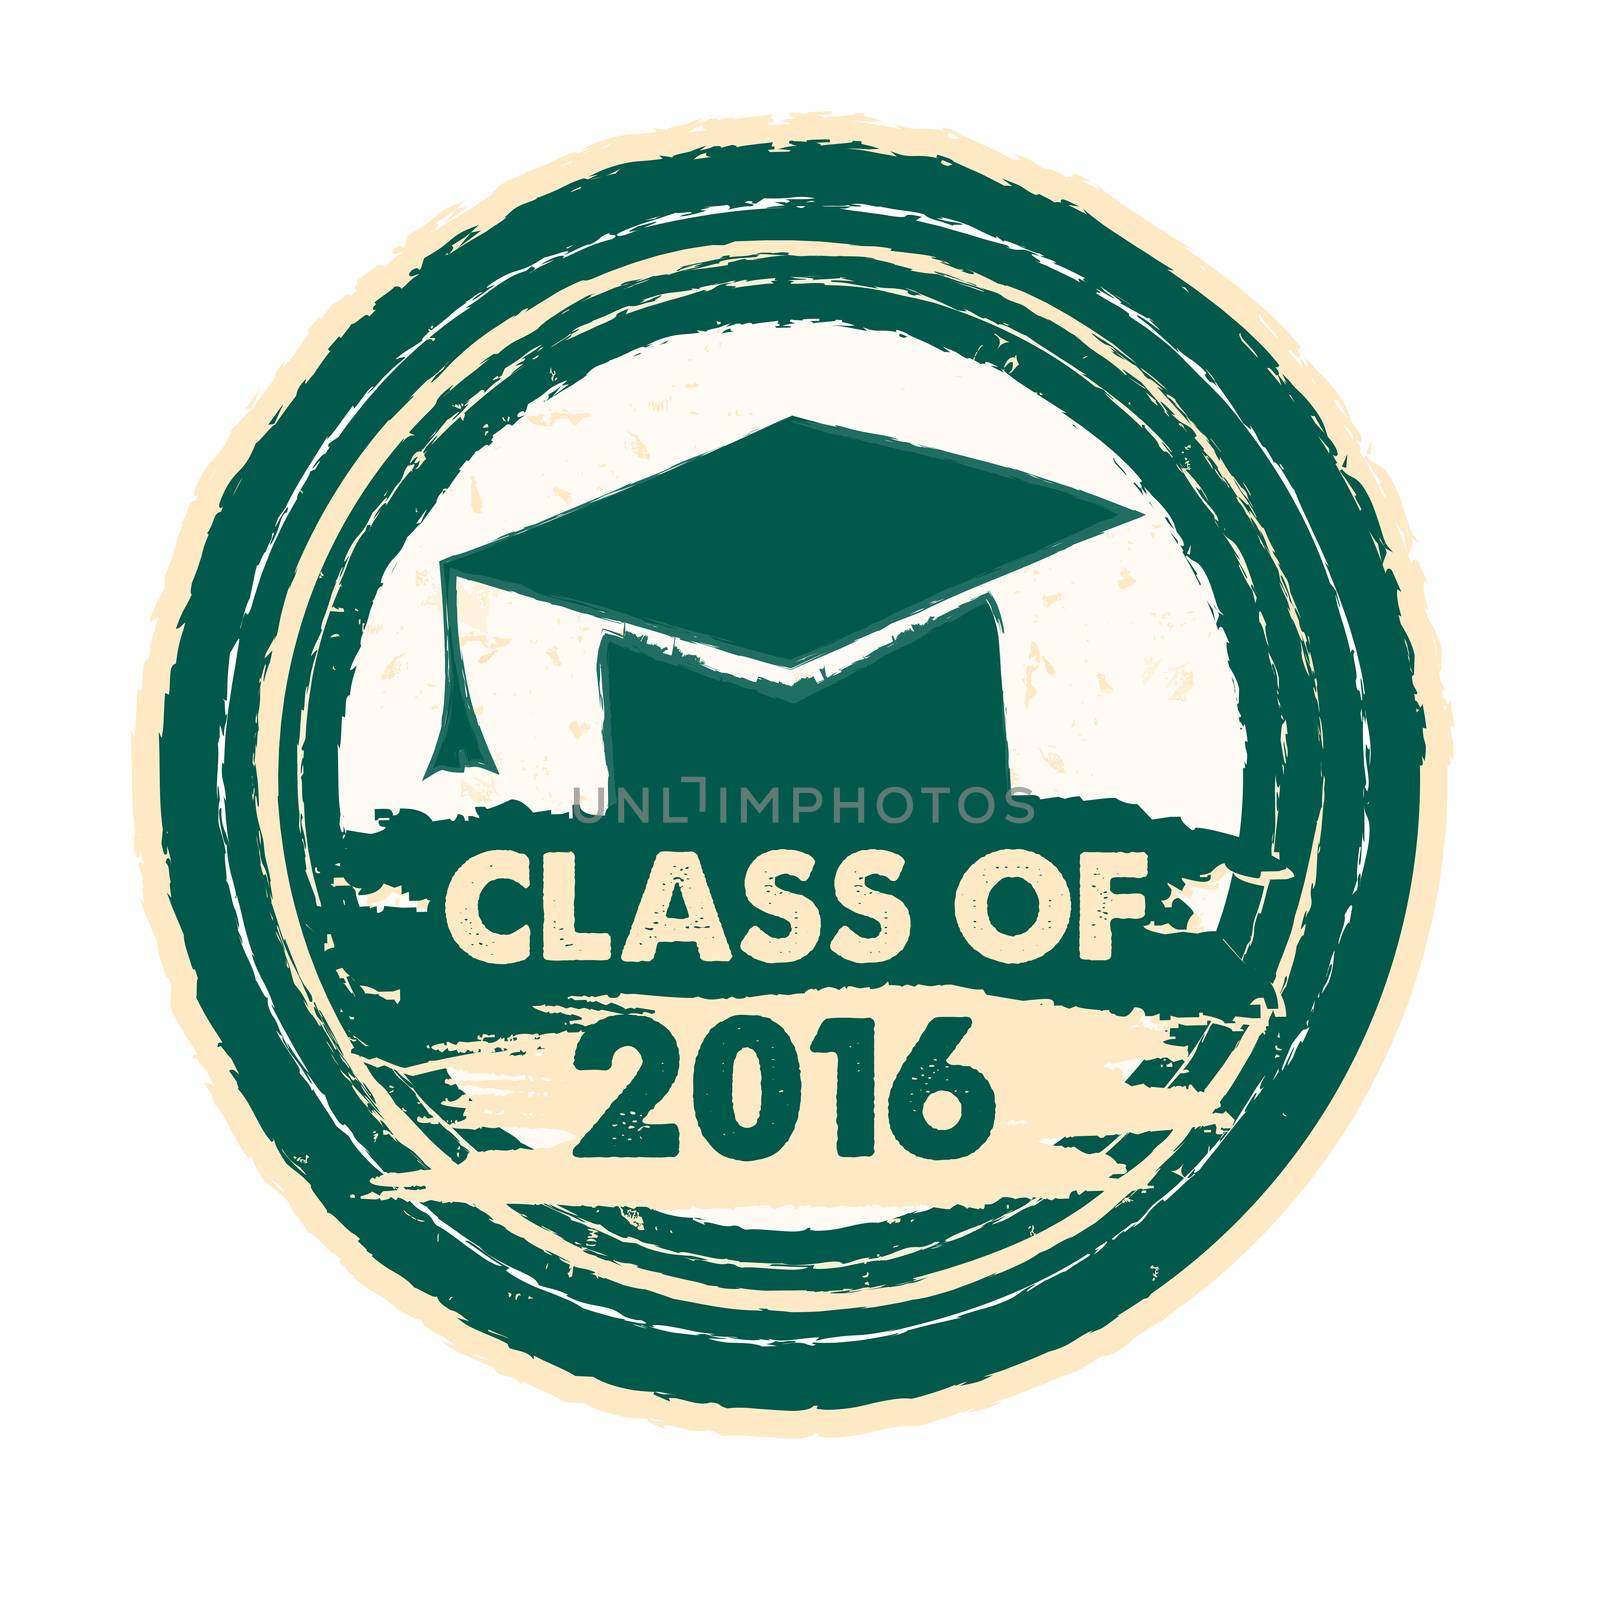 class of 2016 with graduate cap with tassel, round label by marinini